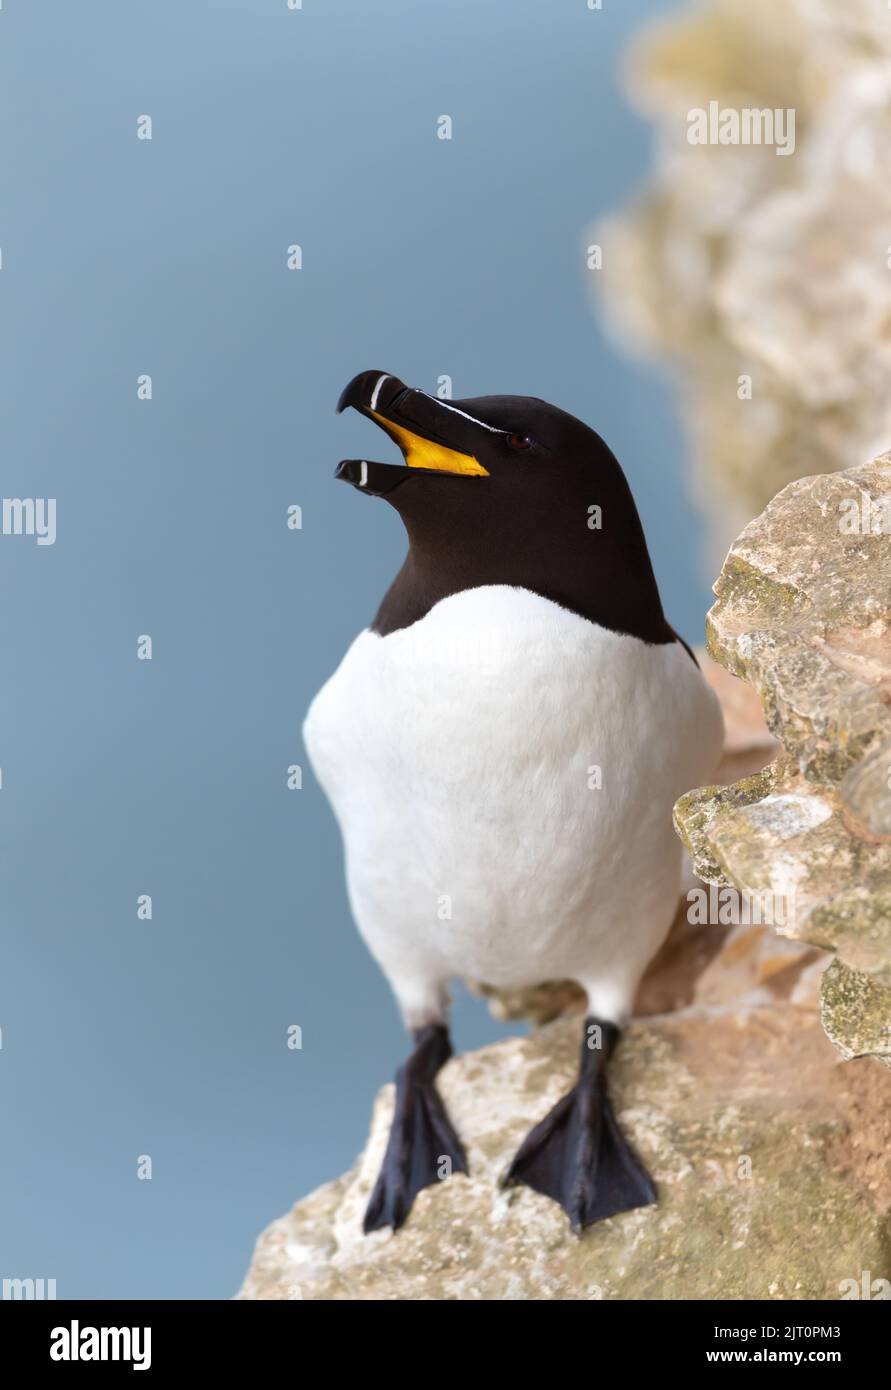 Close up of a Razorbill with an open beak on the cliff edge against blue background, Bempton, UK. Stock Photo